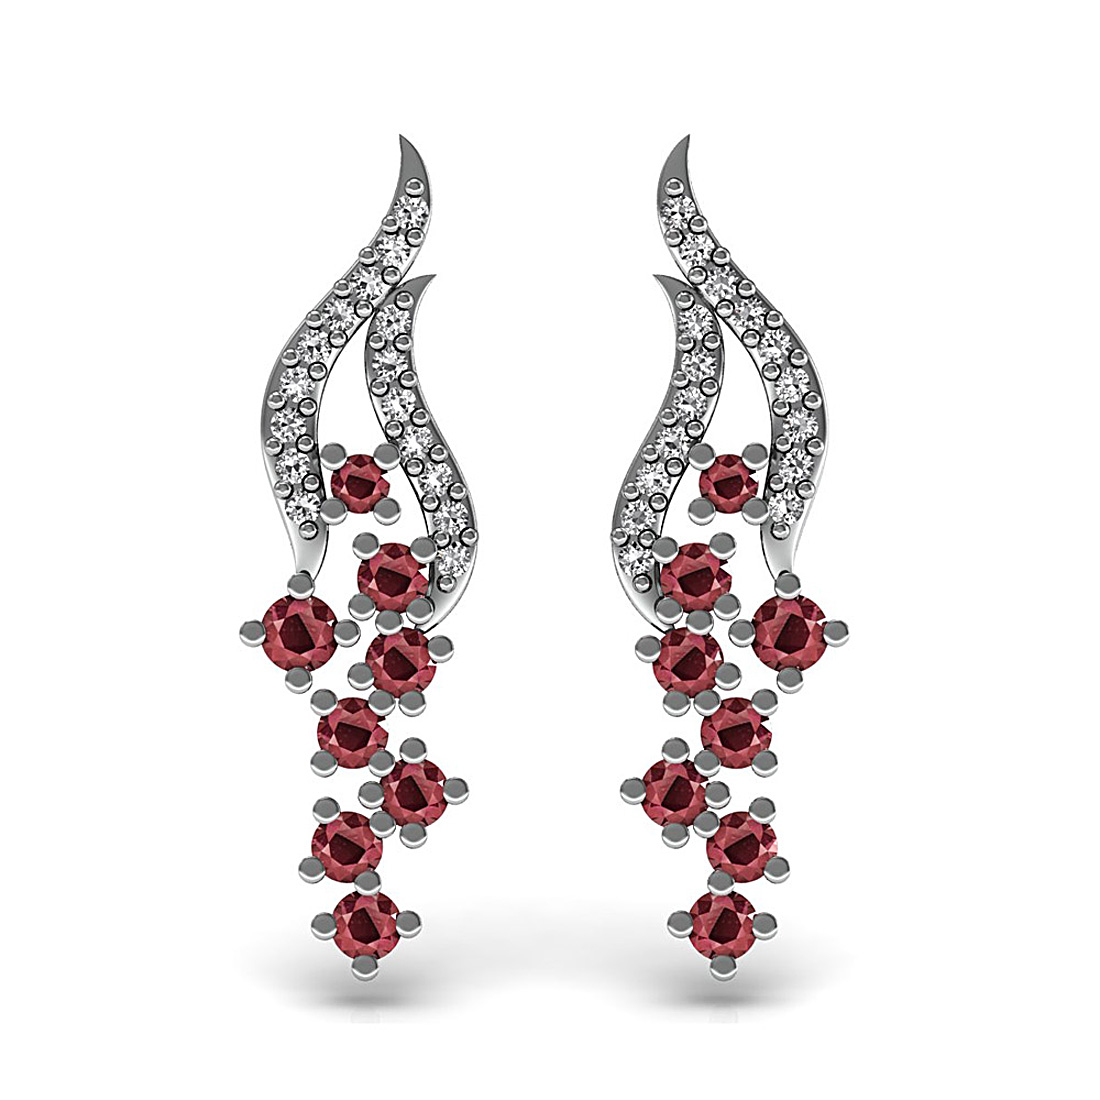 Ruby gemstone floral stud earrings made in 18K solid white gold adorned with genuine diamond.